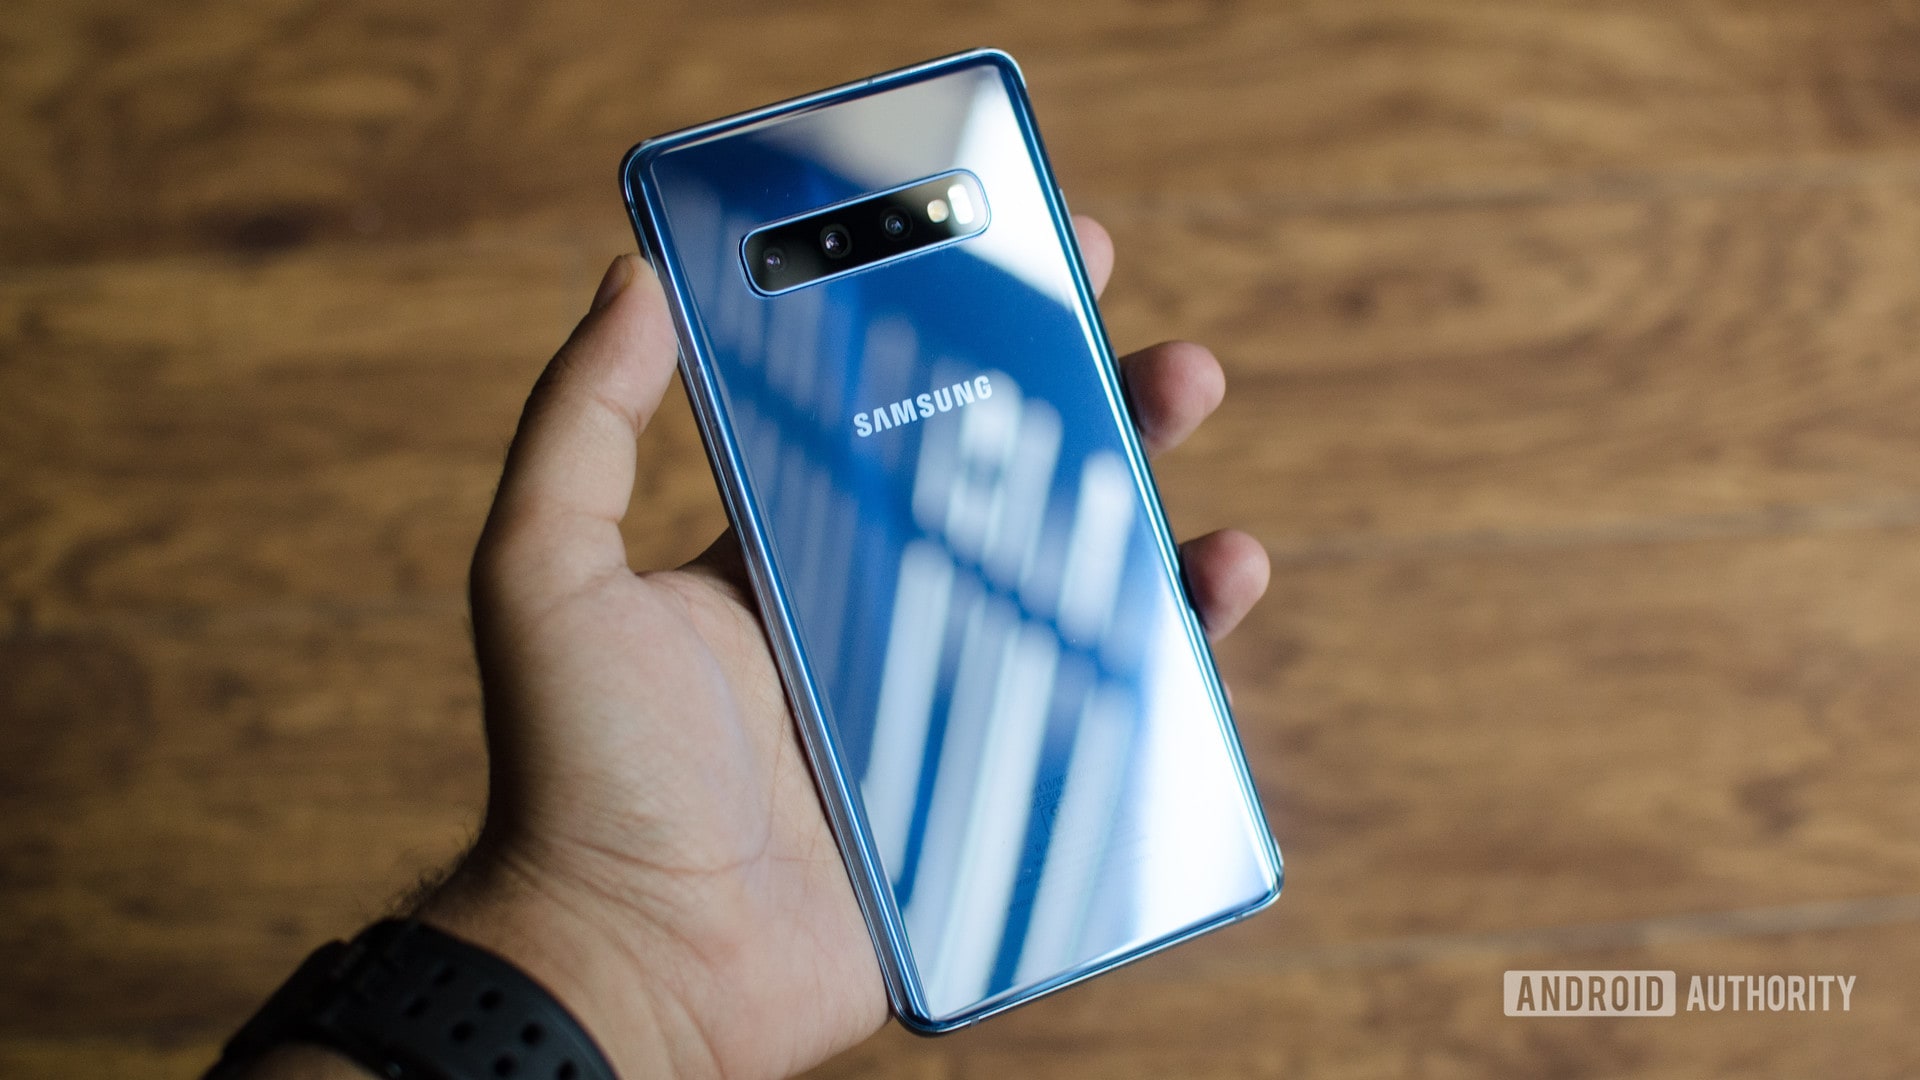 The back of the Galaxy S10 to promote the Samsung Galaxy S10 Plus discount for 2020.